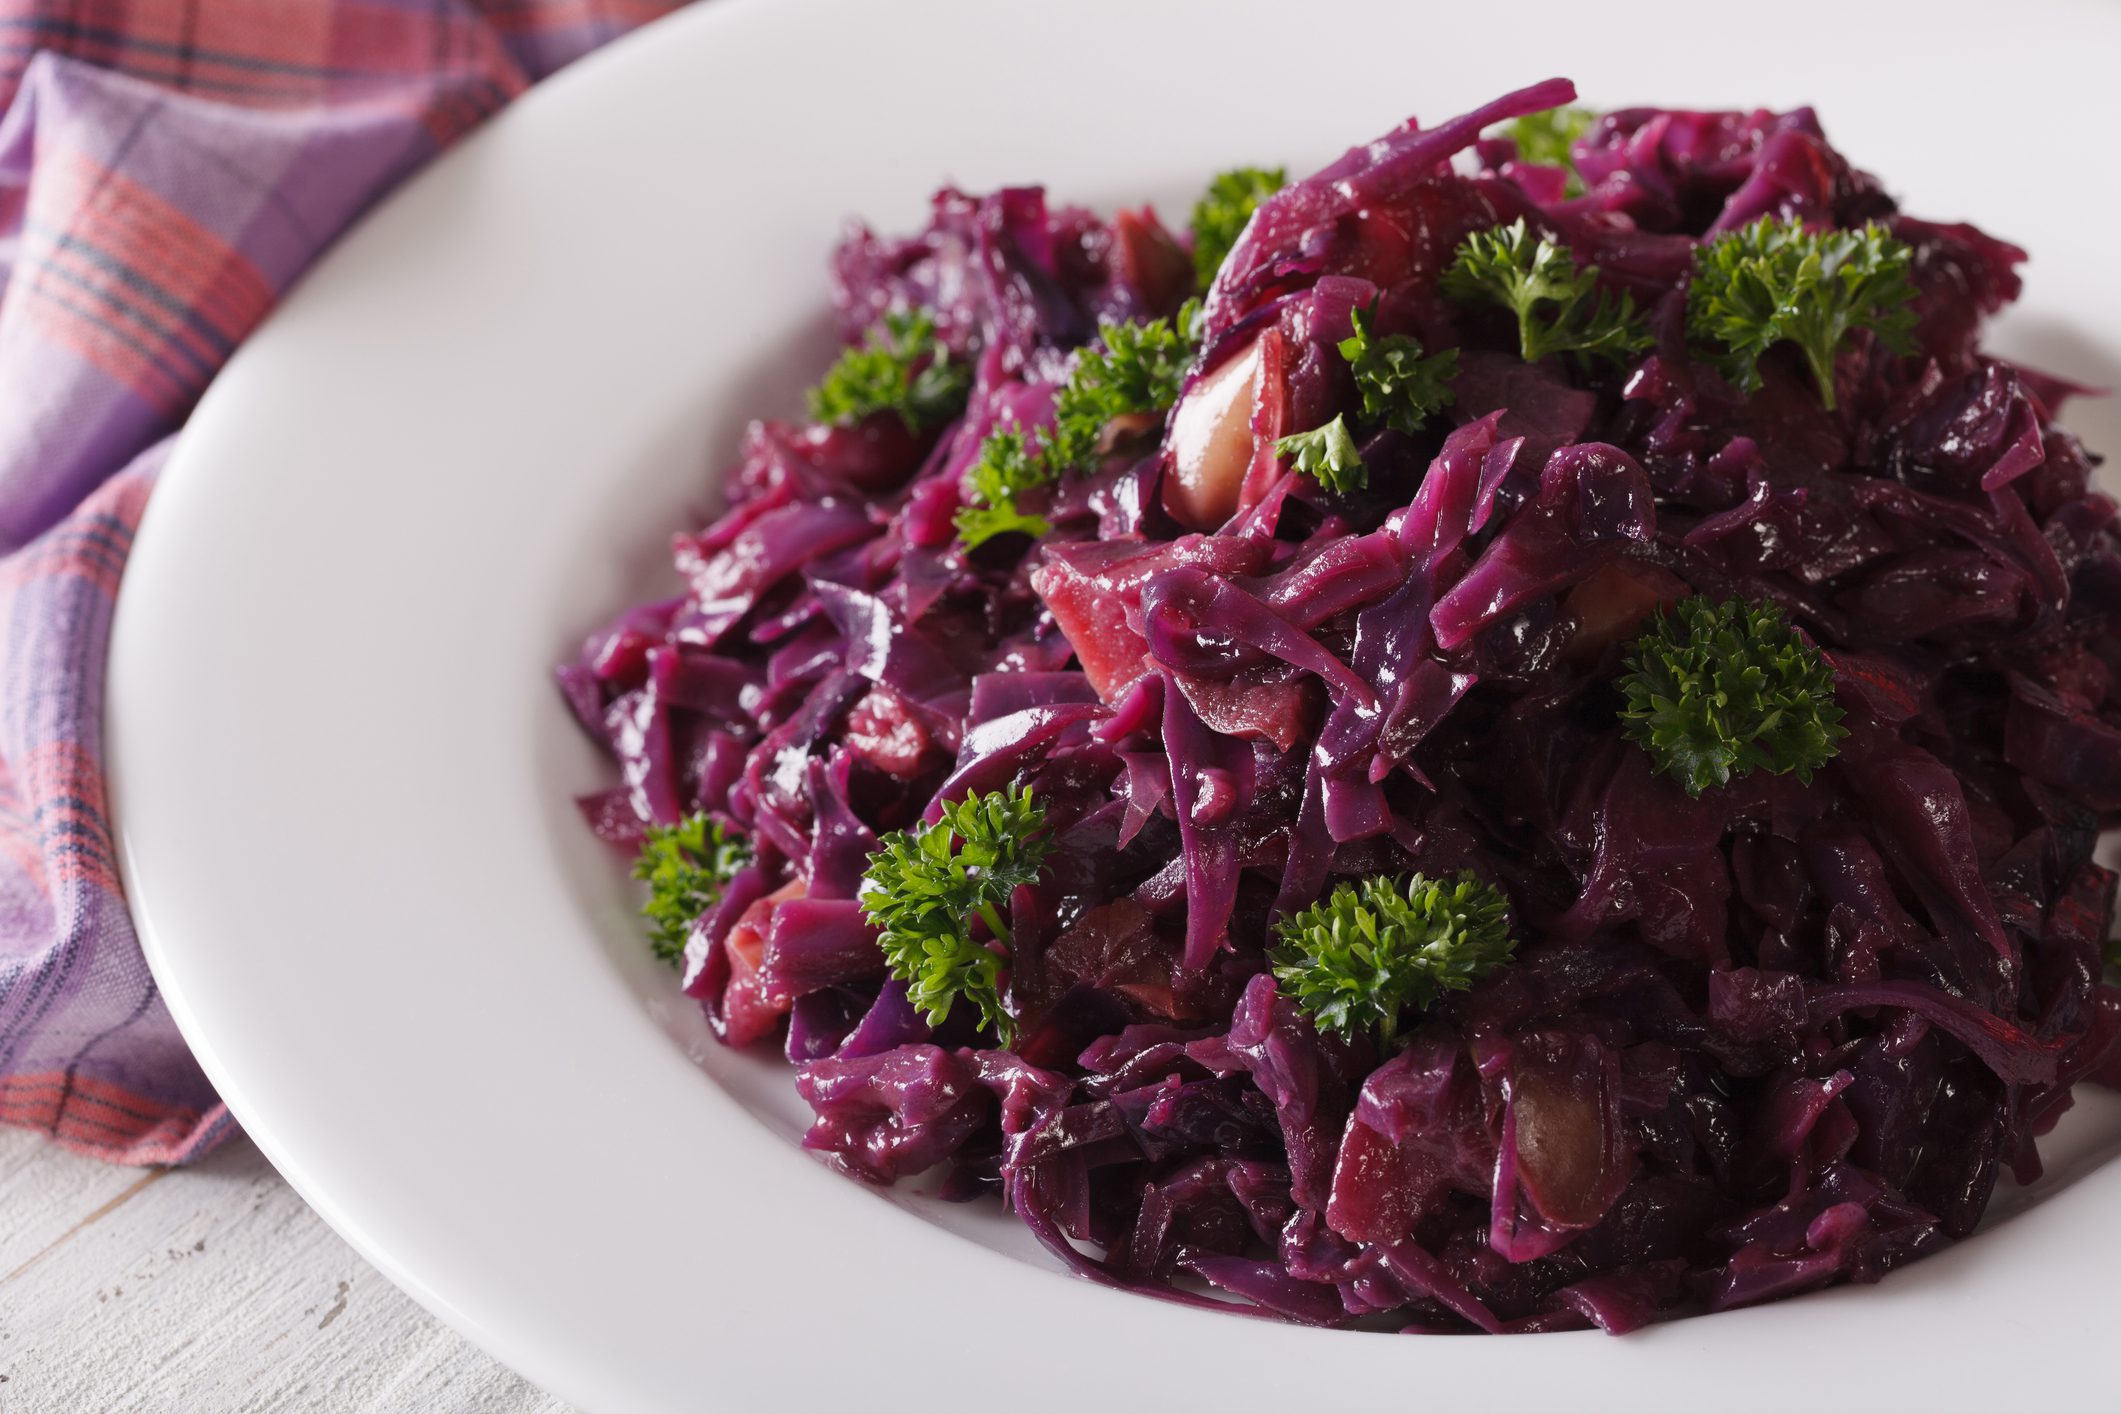 Delicious braised red cabbage close-up on a plate. horizontal